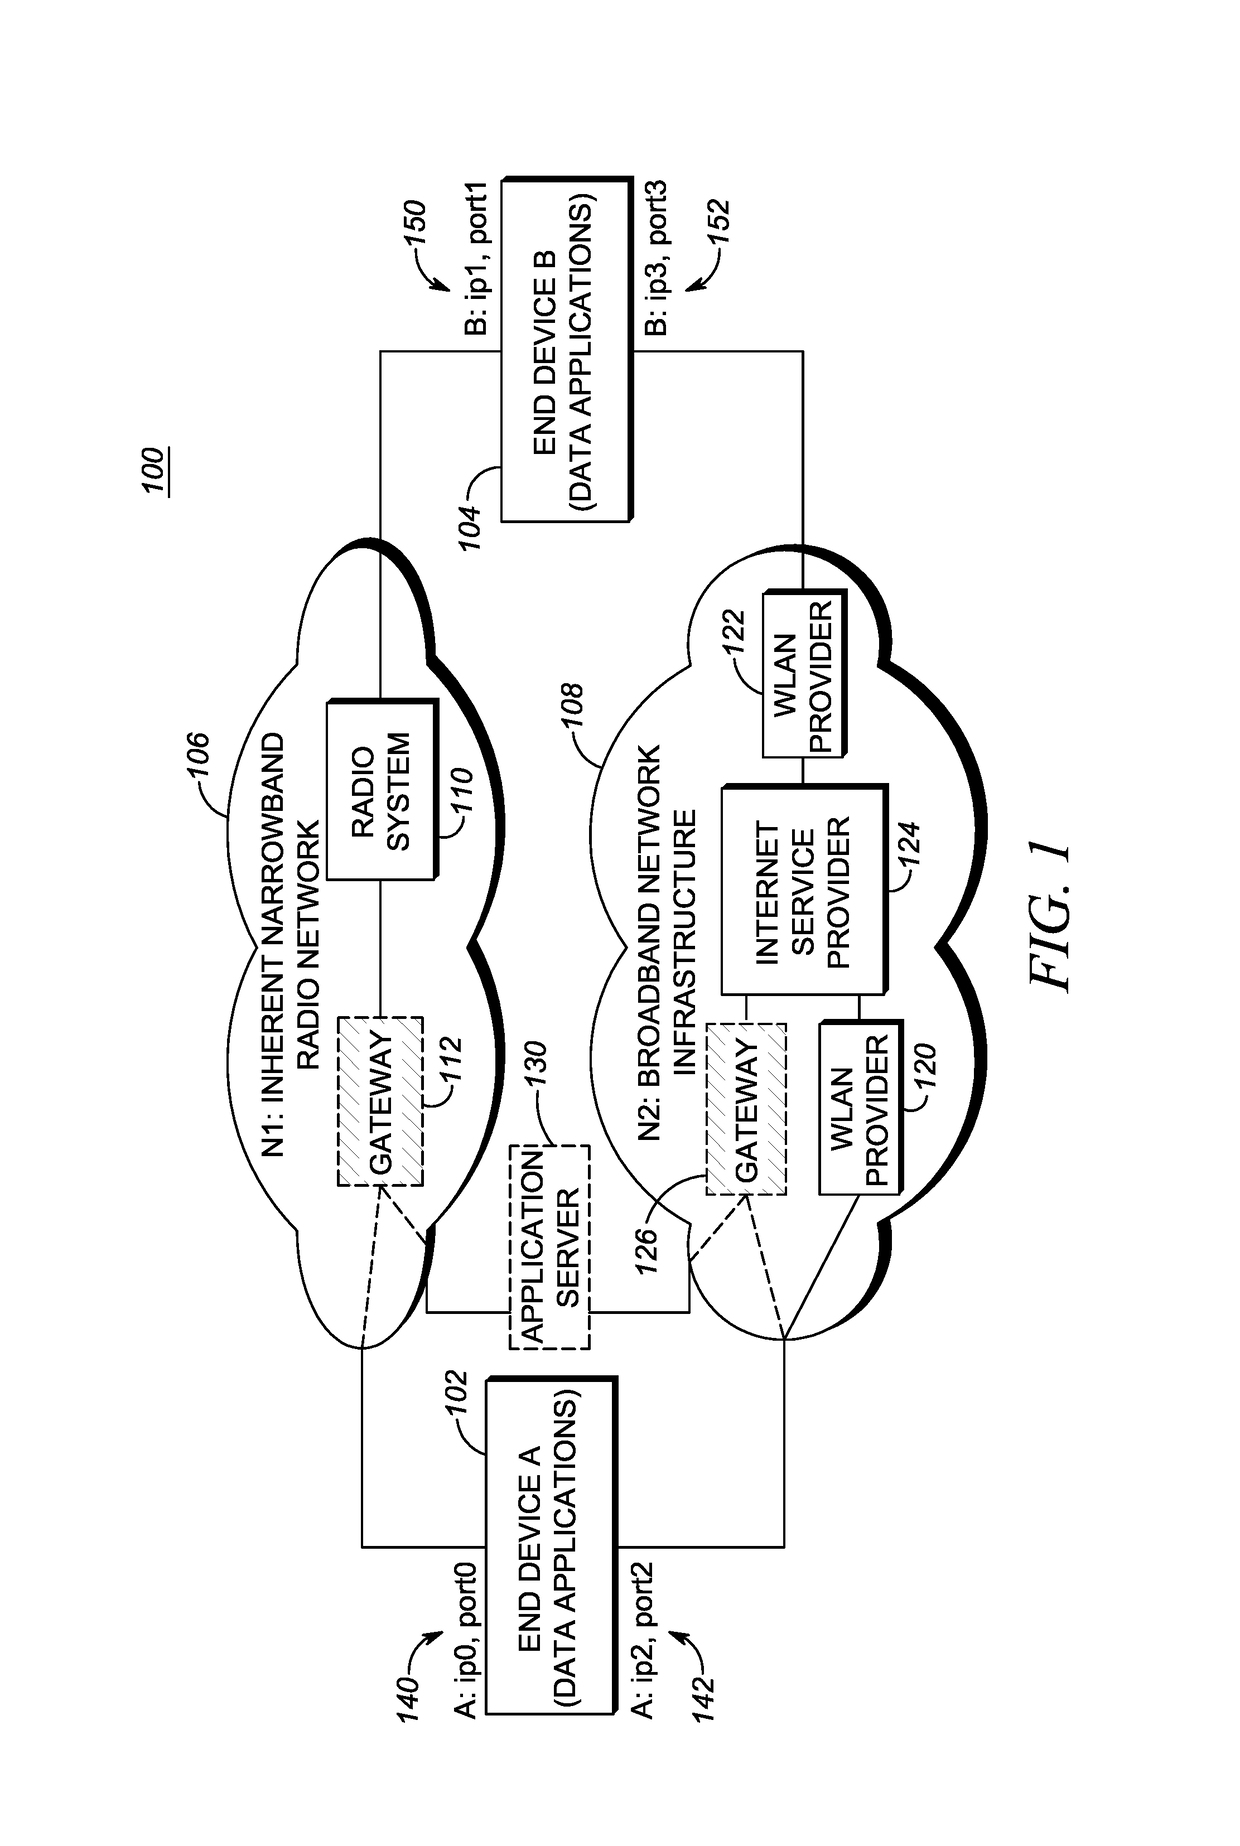 Methods for managing a broadband connection using a narrowband connection